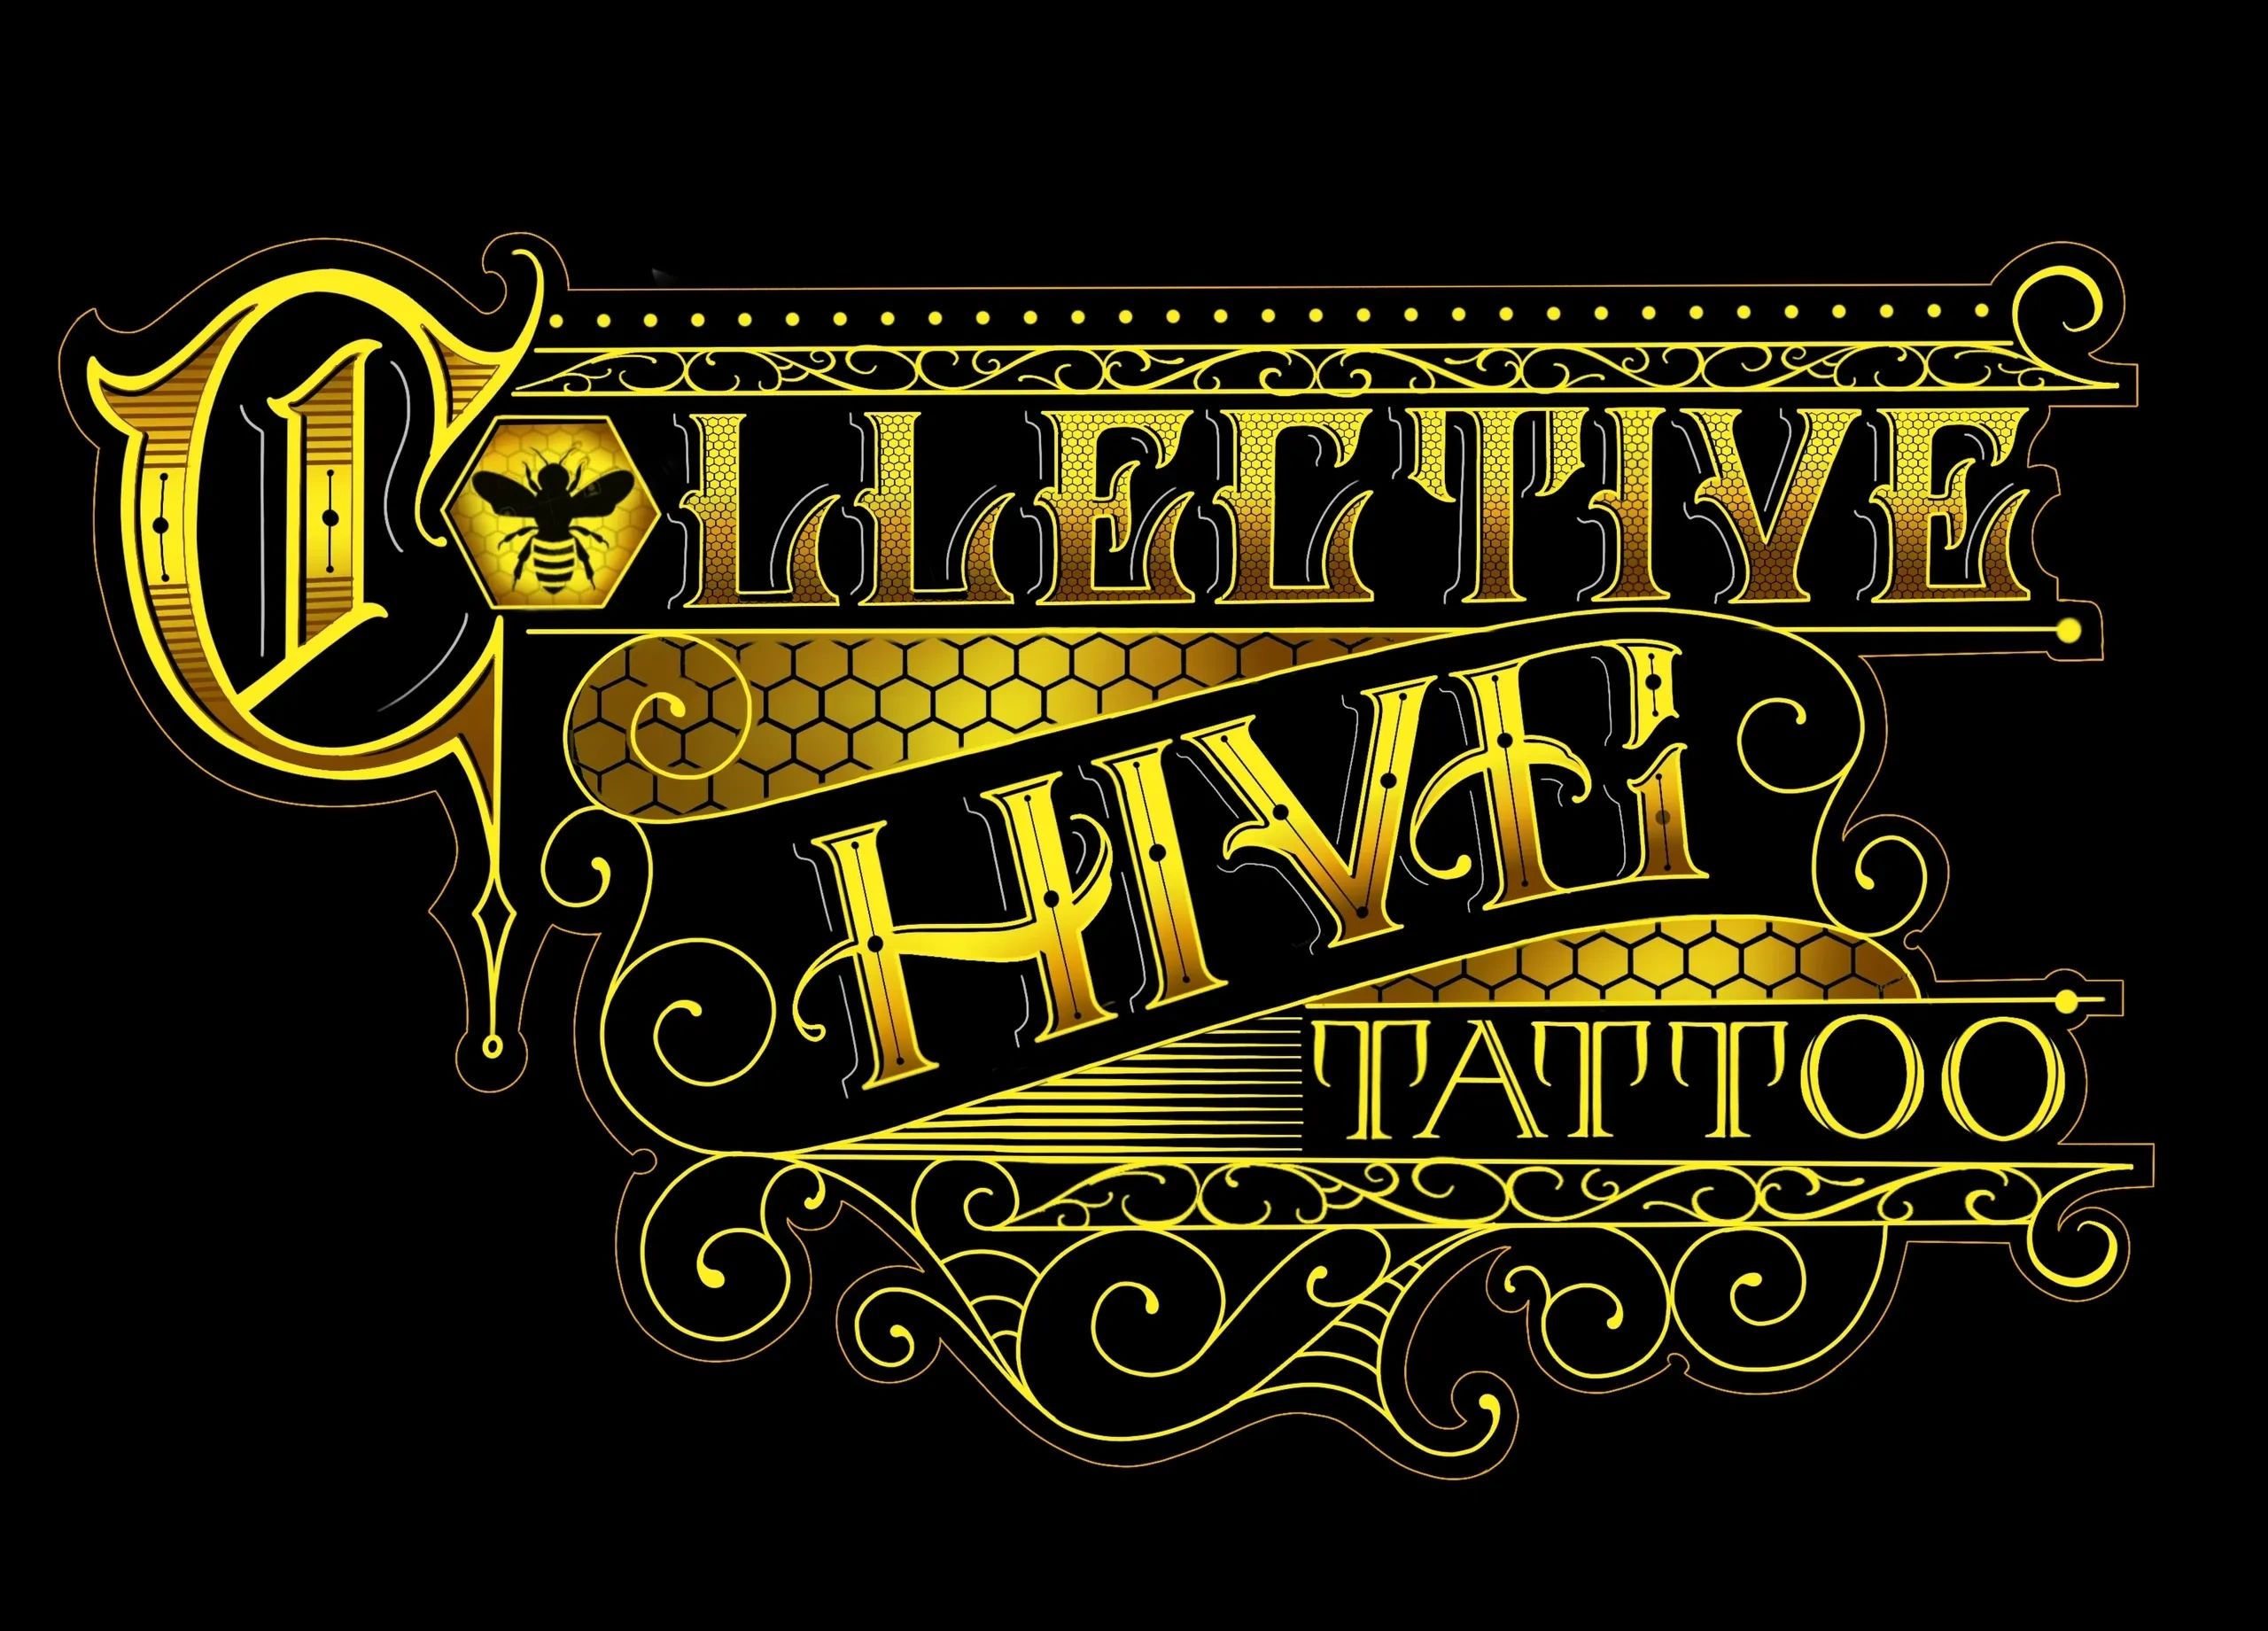 Hive Tattoo Collective hivetattoos  Instagram photos and videos